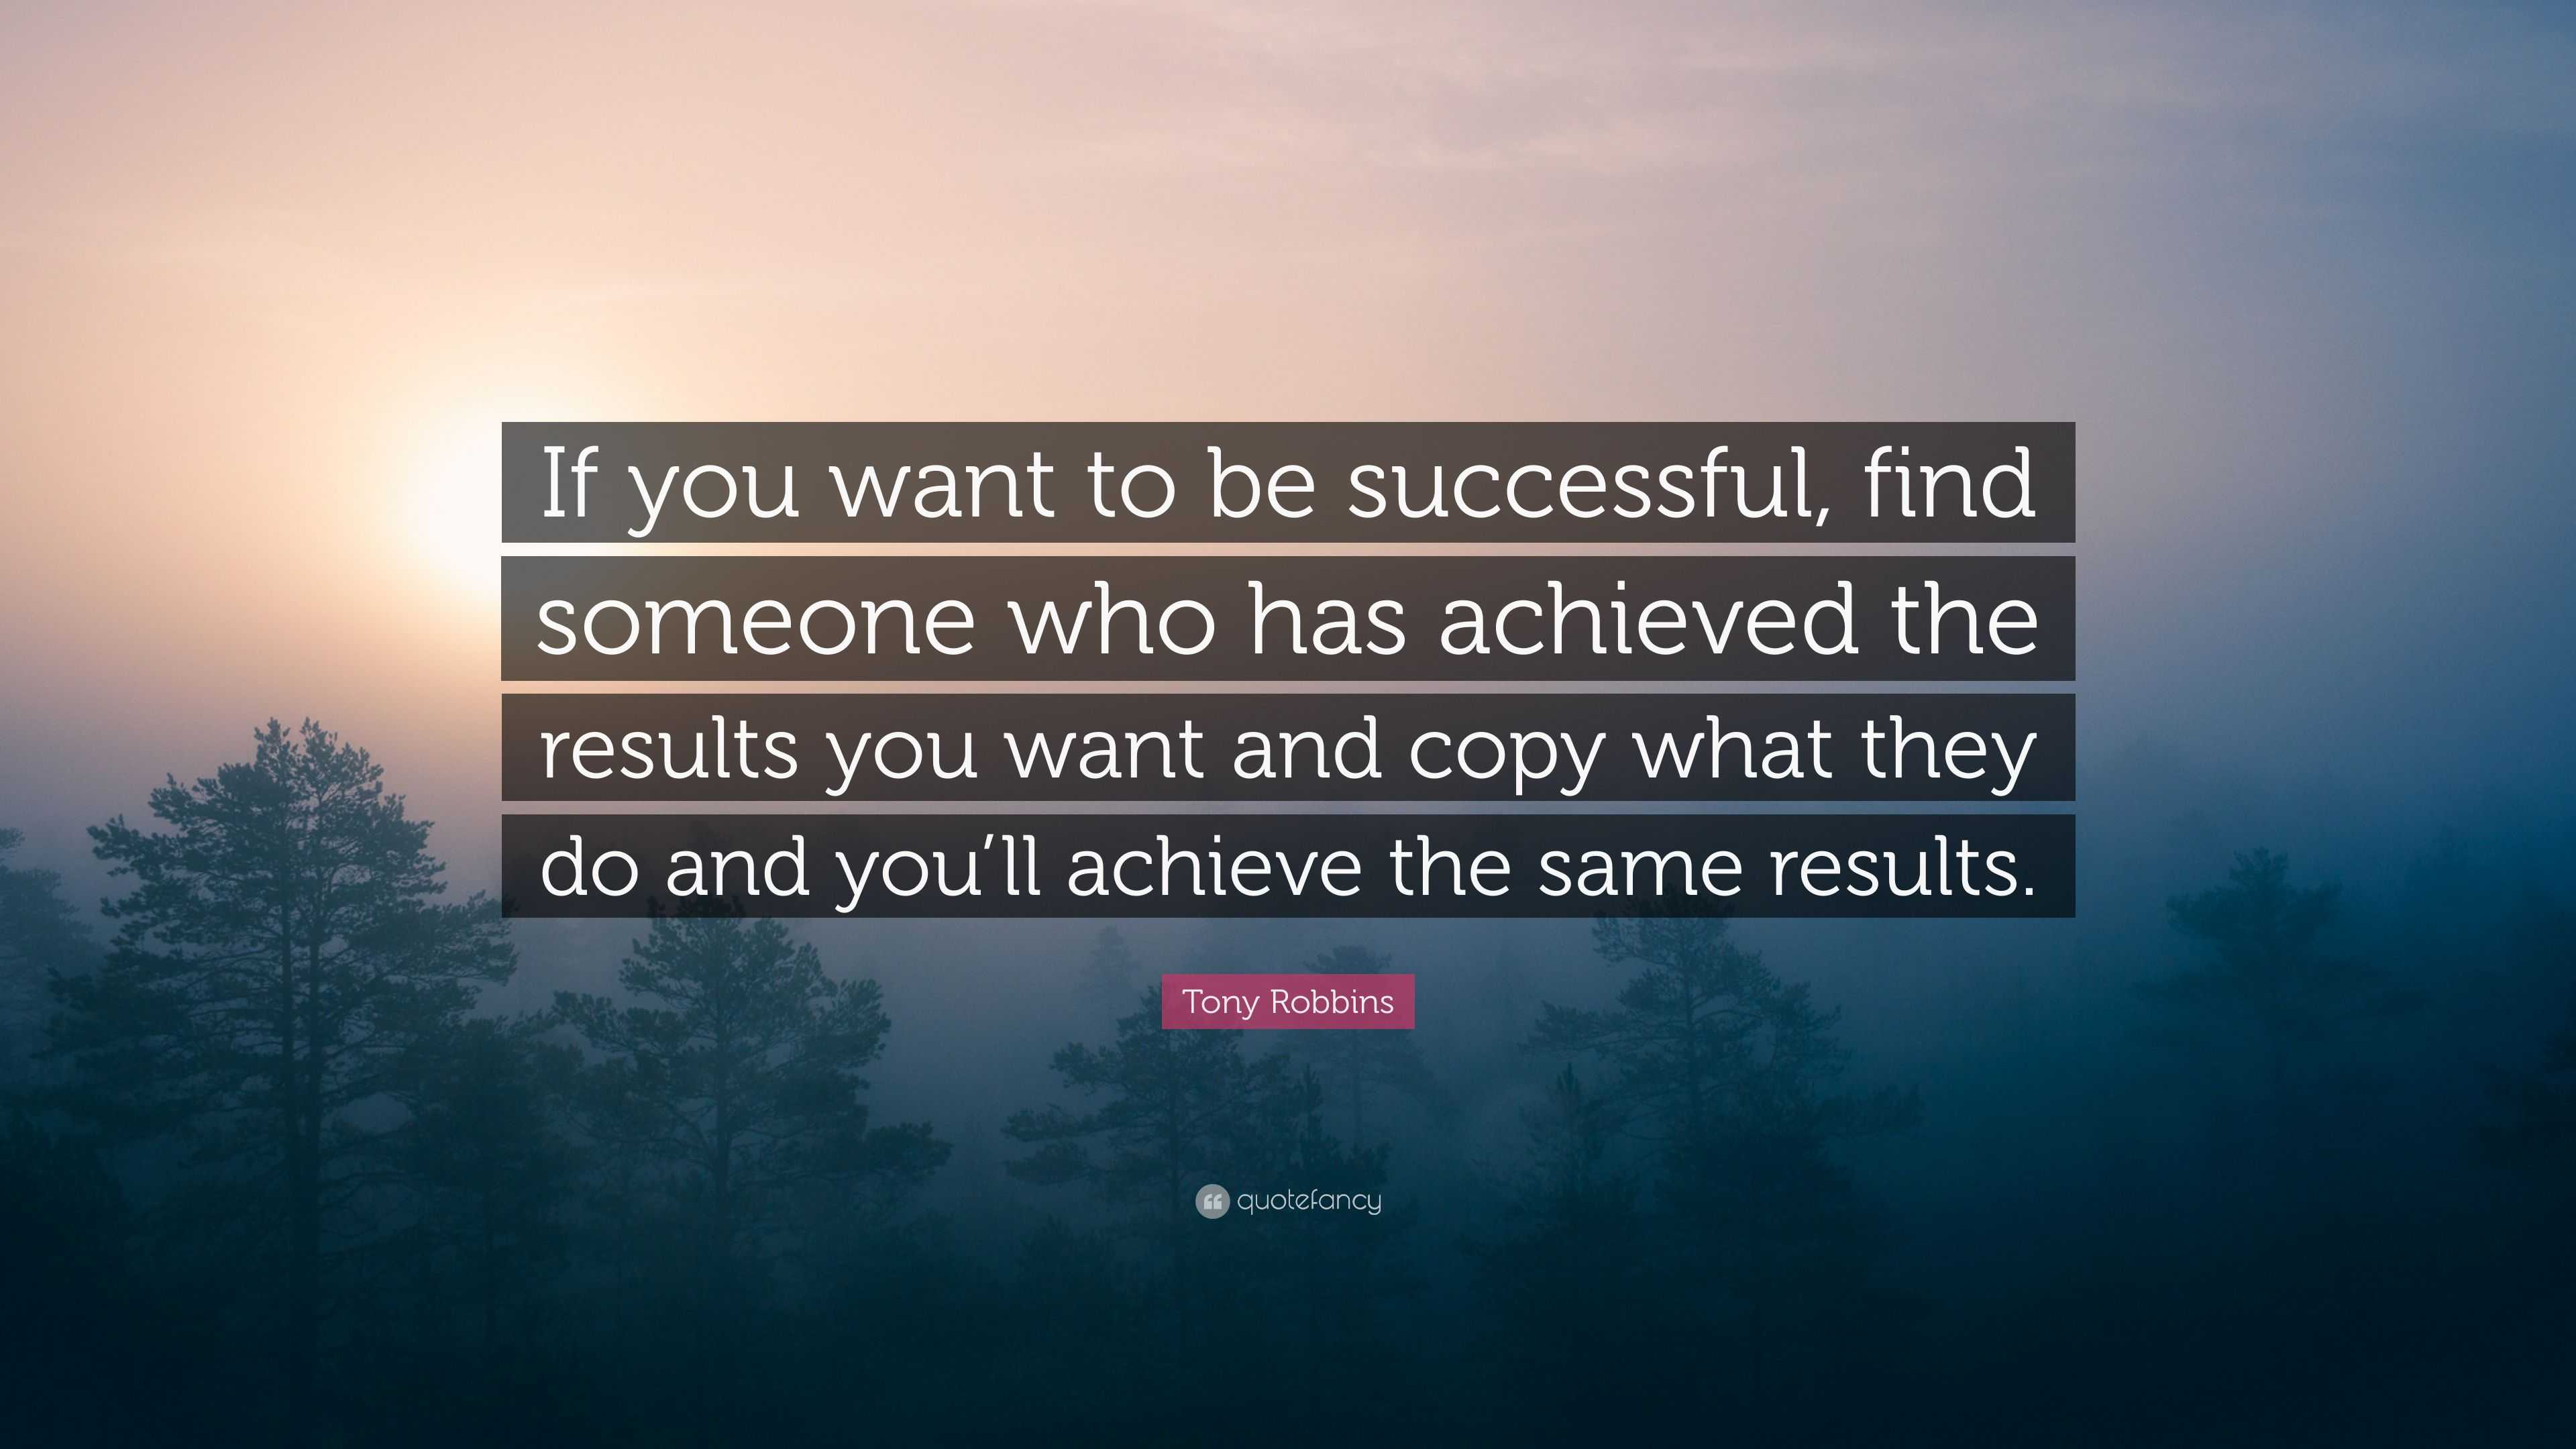 Tony Robbins Quote: “If you want to be successful, find someone who has ...